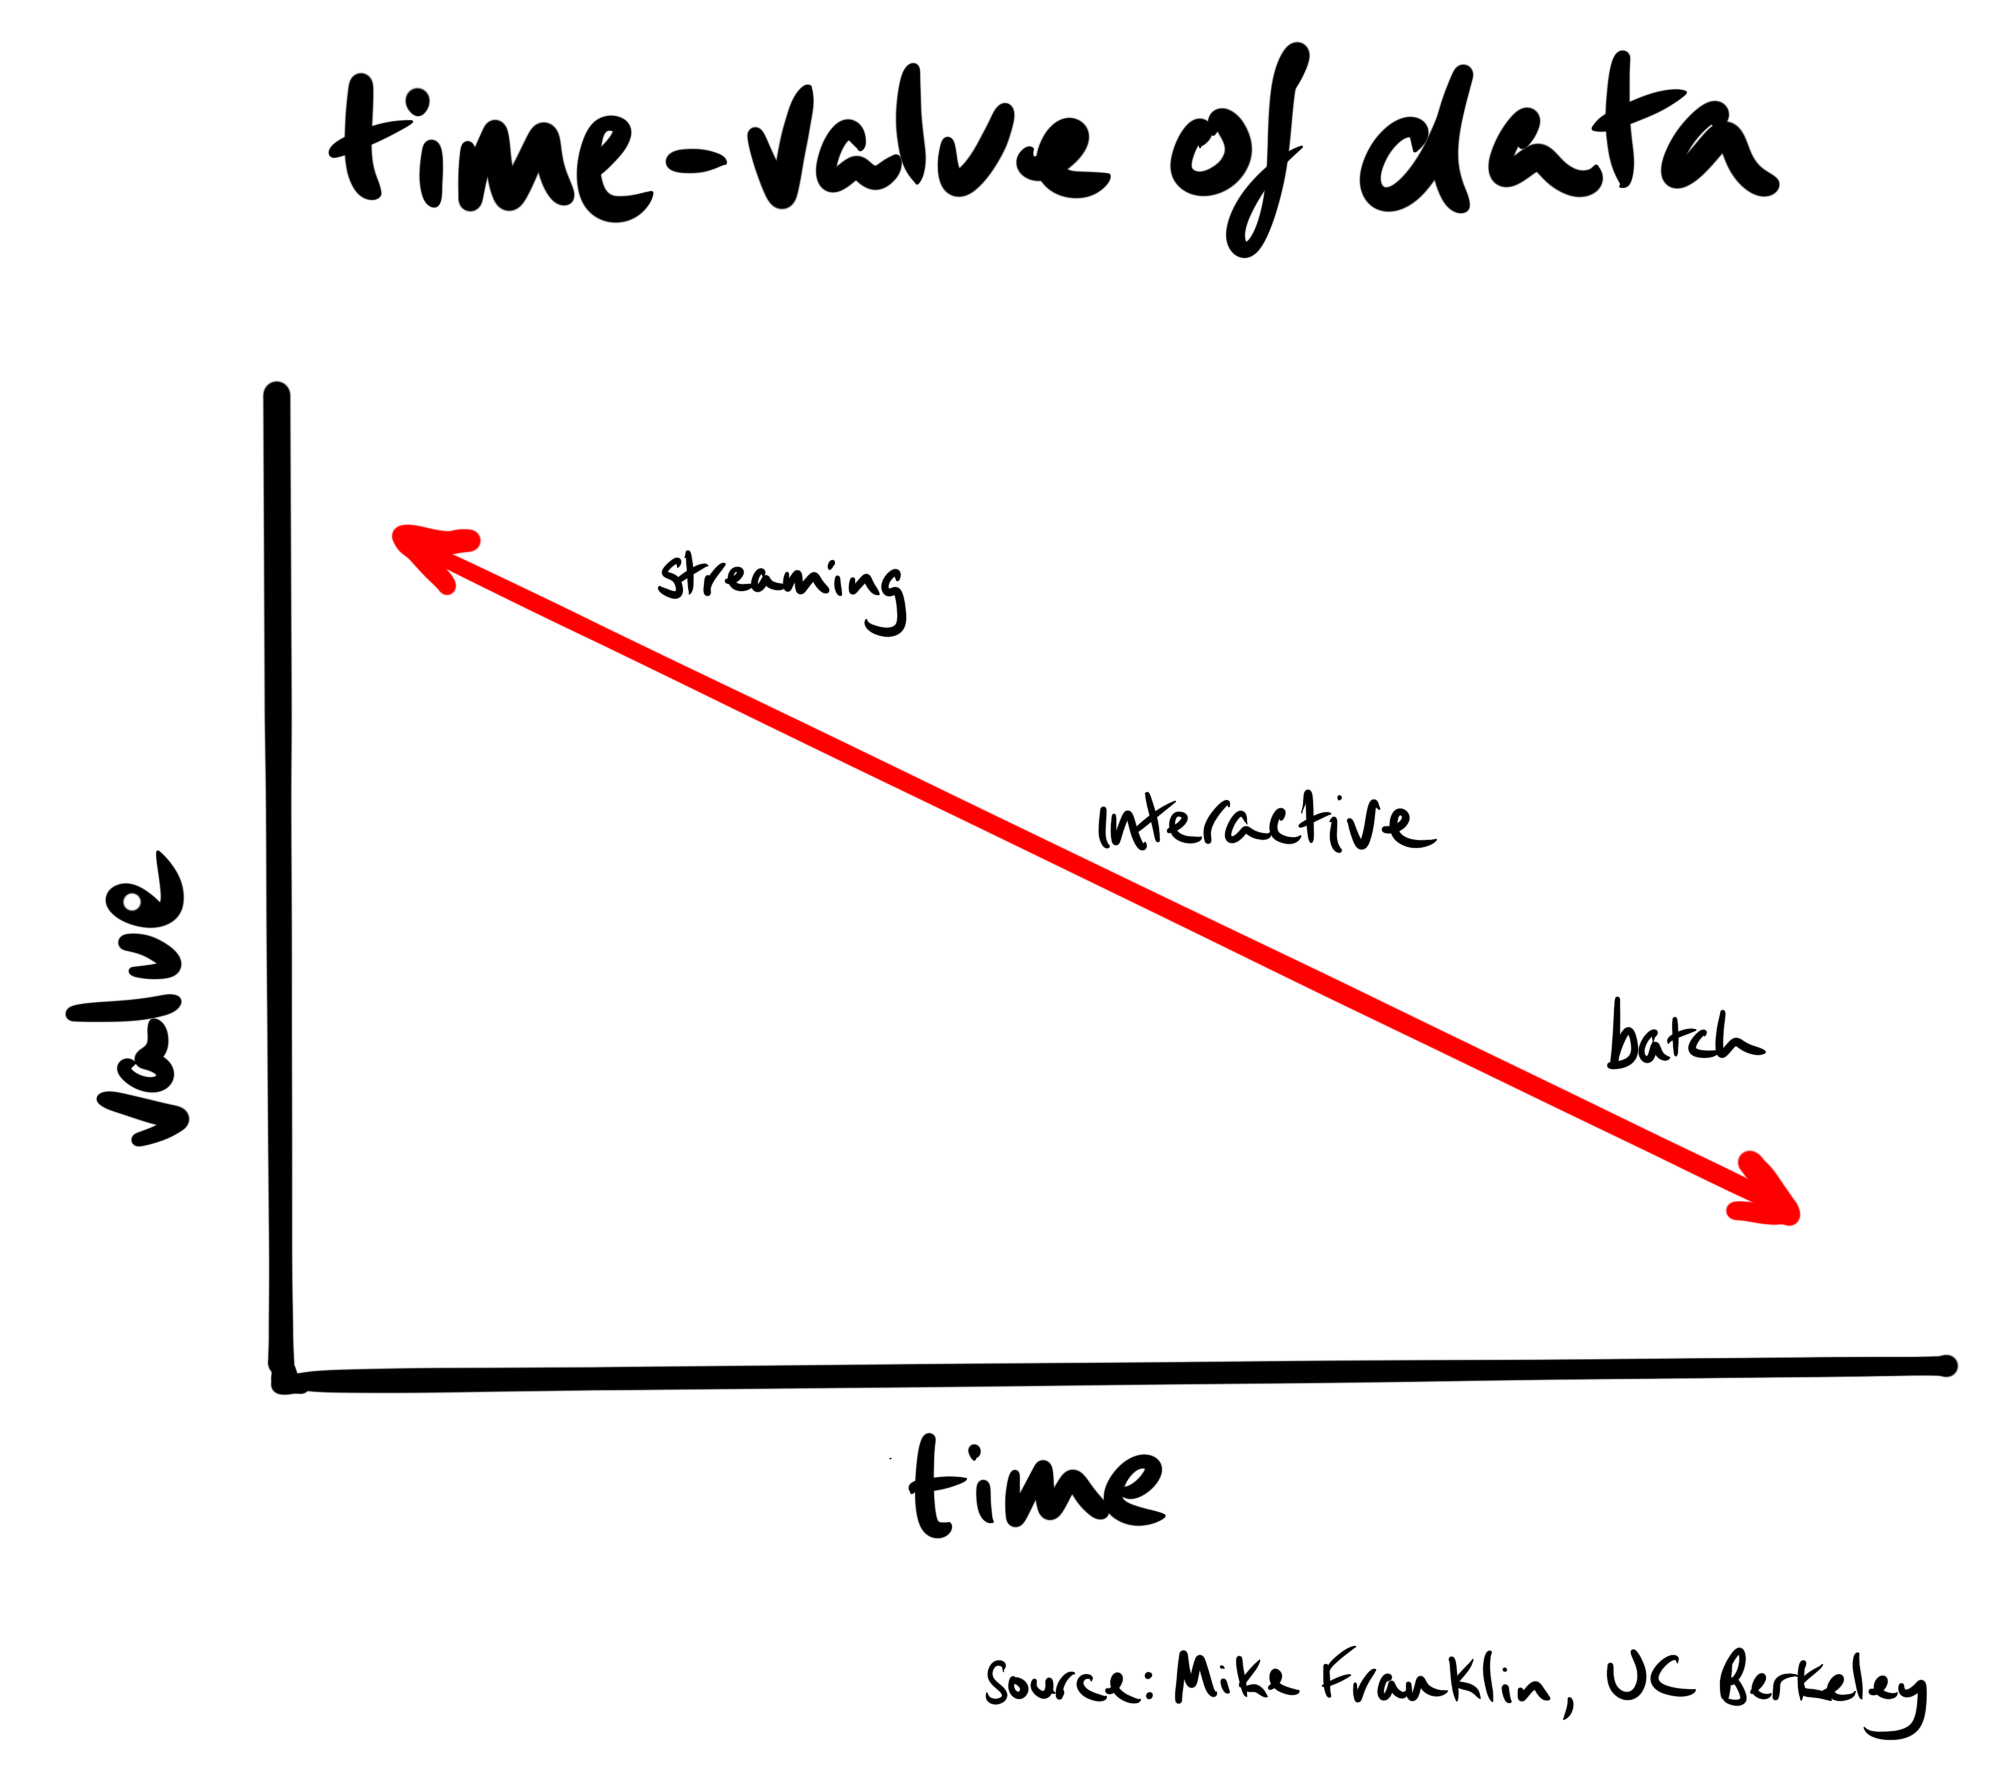 time value of data